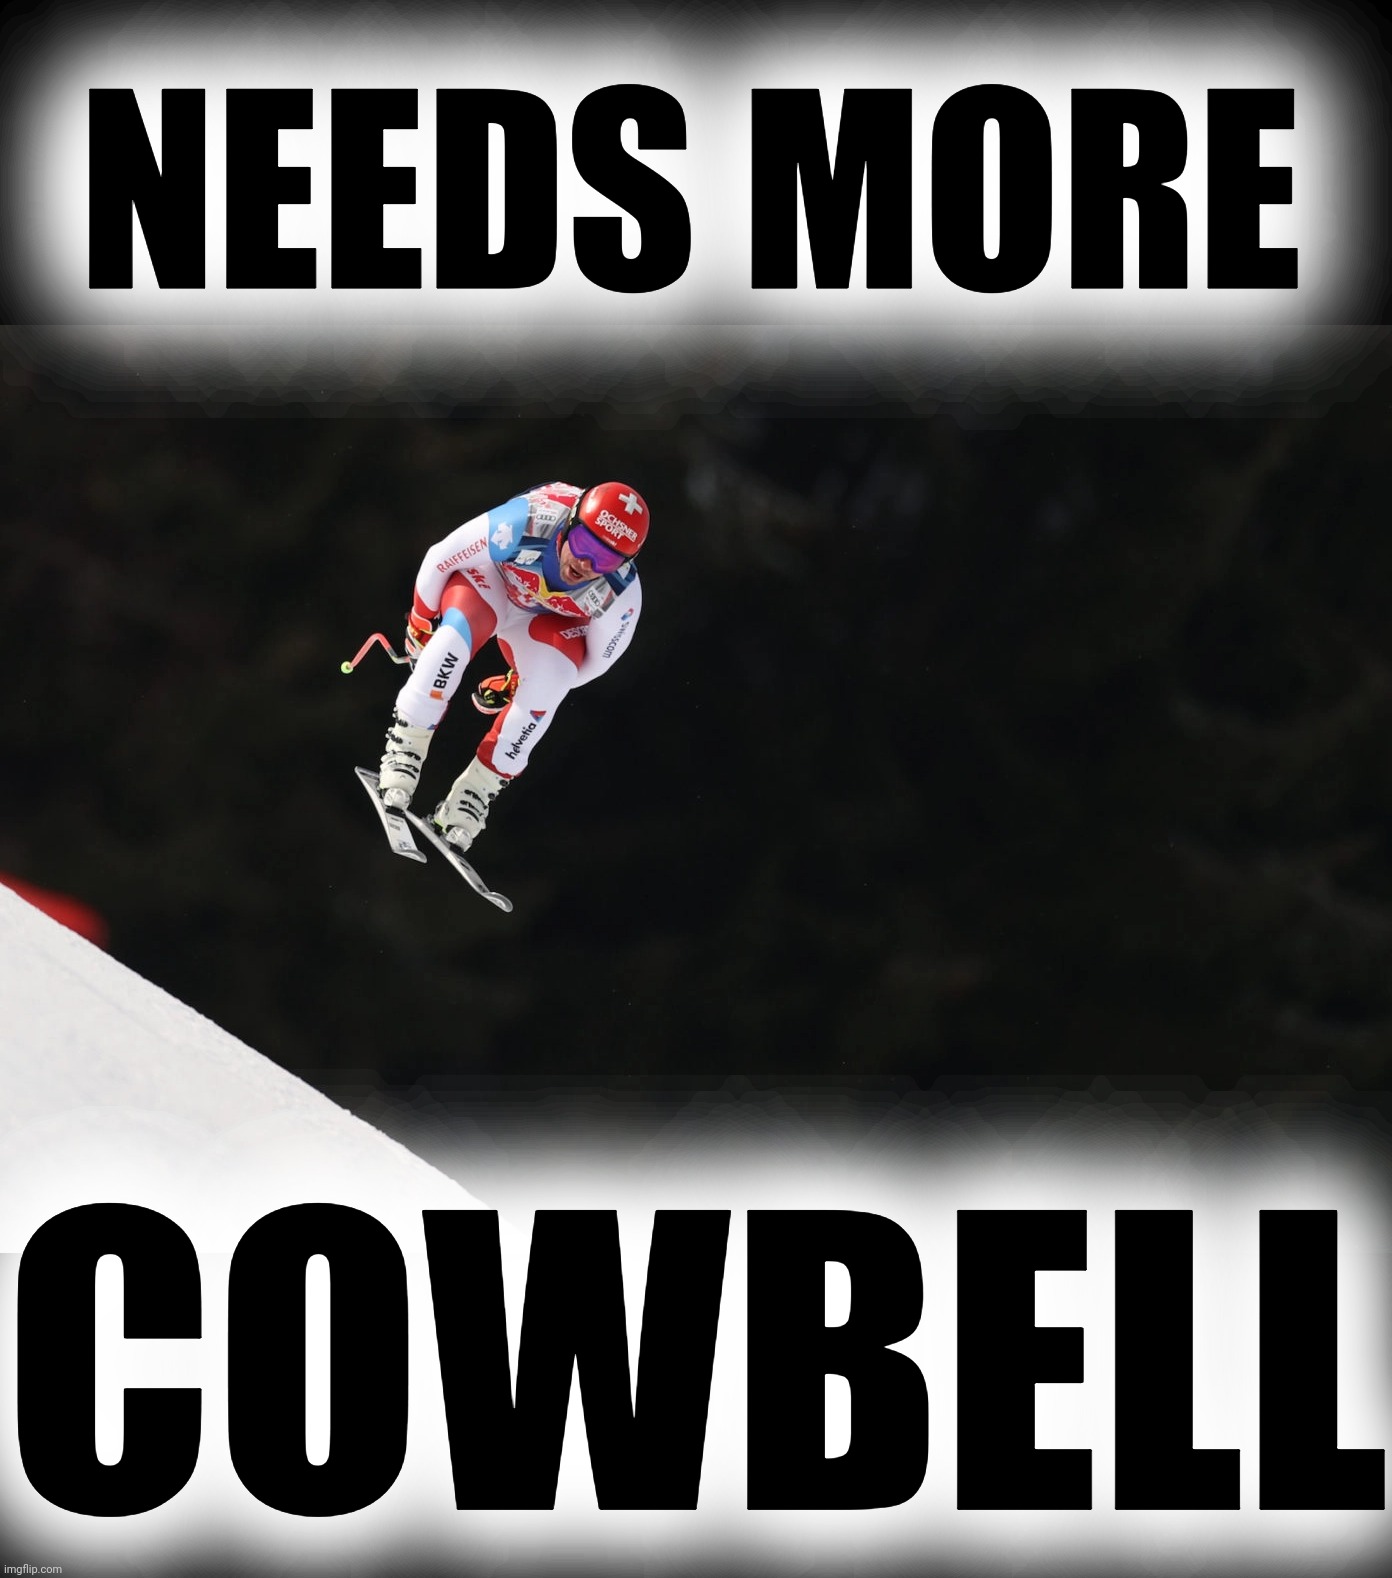 Hahnenkammrennen | NEEDS MORE; COWBELL | image tagged in hahnenkammrennen,hahnenkamm,austria,beat feuz,needs more cowbell,streif | made w/ Imgflip meme maker